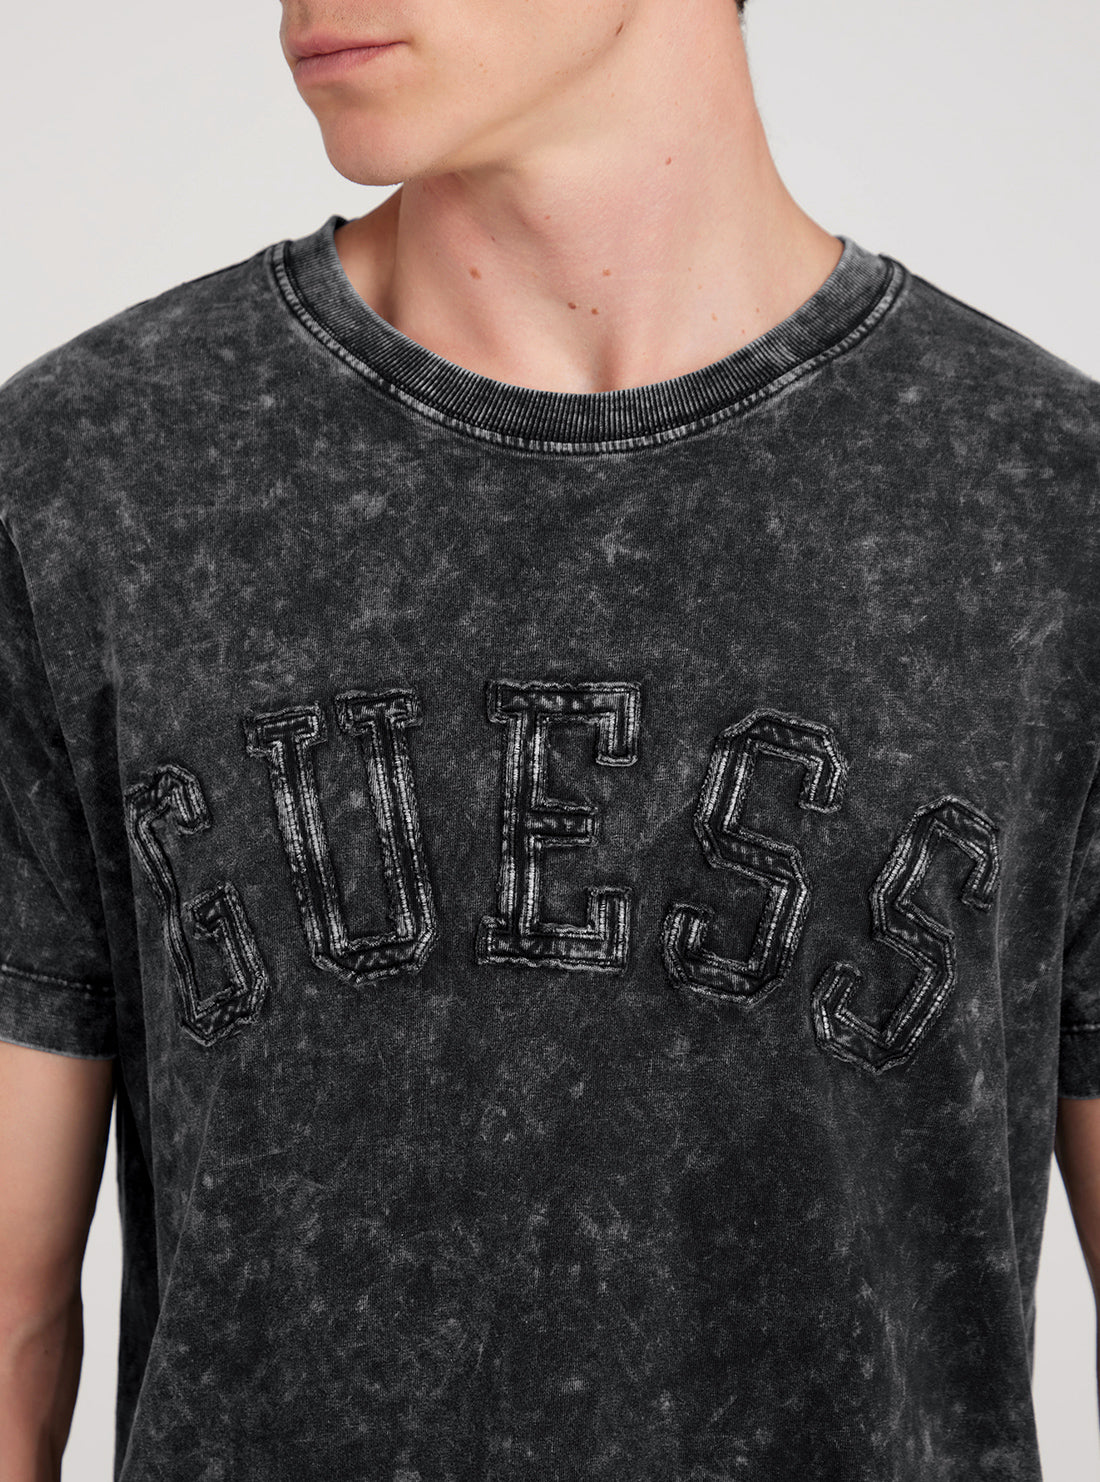 GUESS Black Wash Short Sleeve Patch T-Shirt detail view